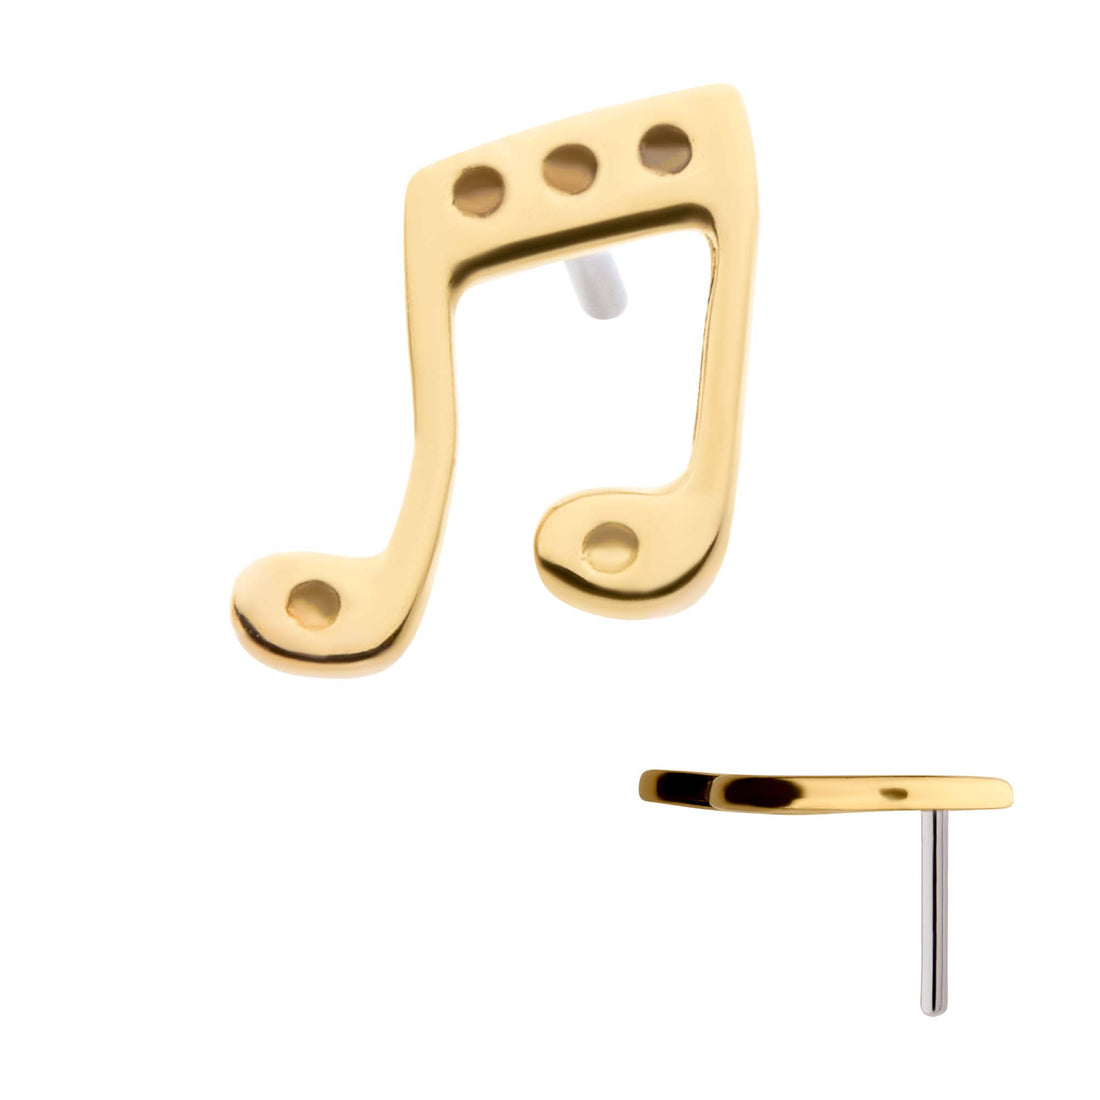 14kt Yellow Gold Threadless Music Two Eighth Notes Top